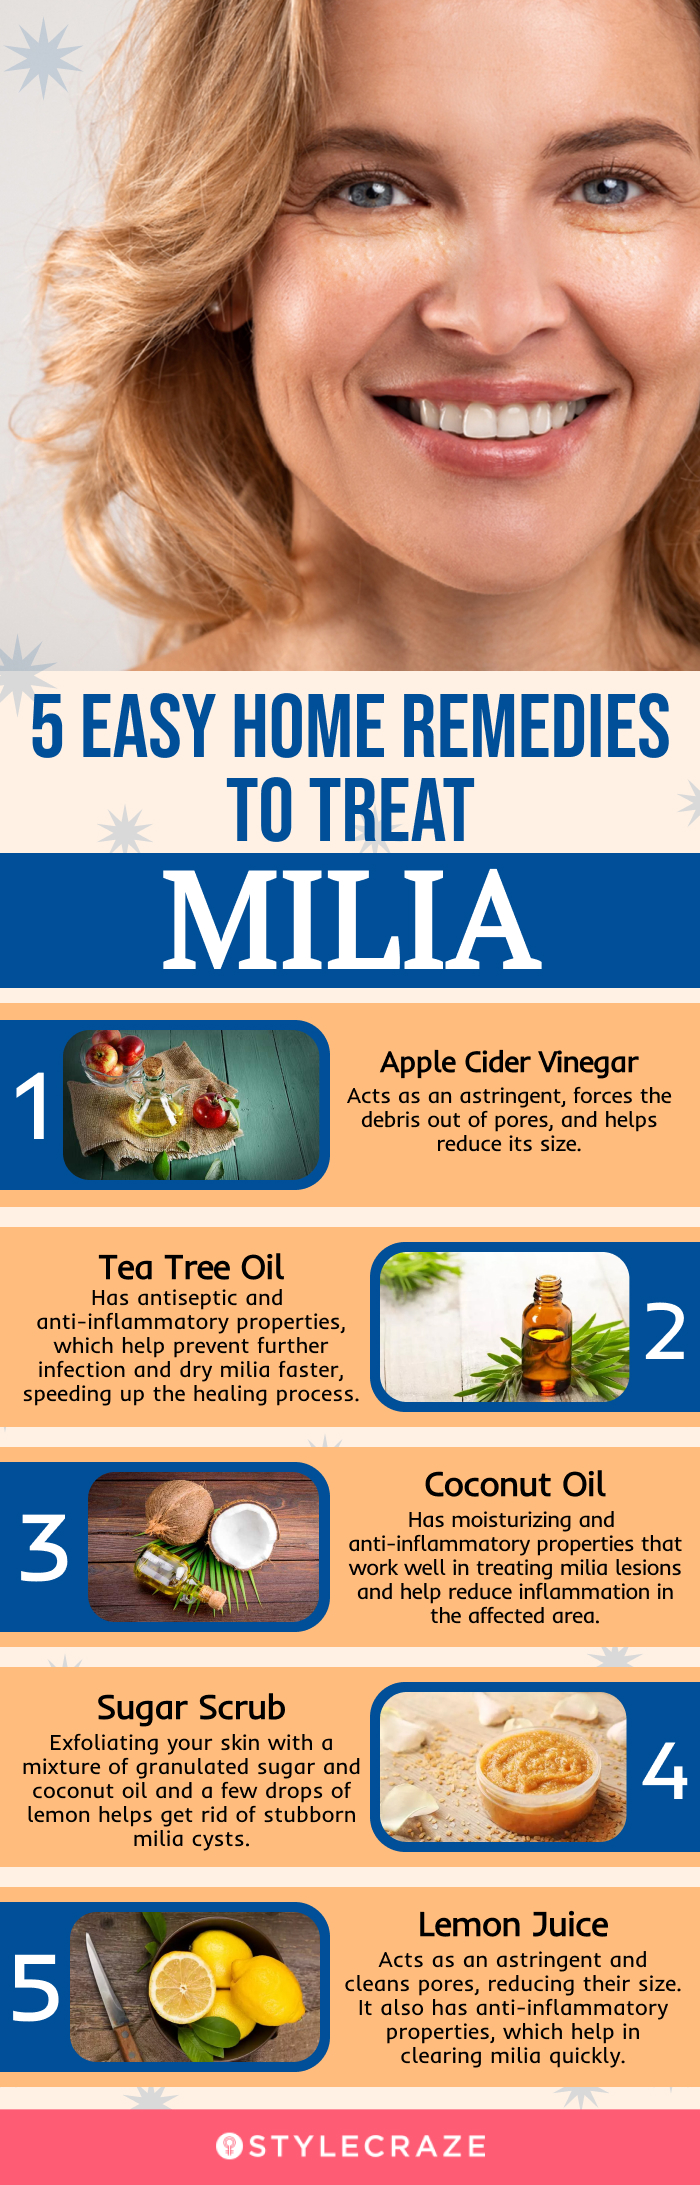 easy home remedies to treat milia [infographic]